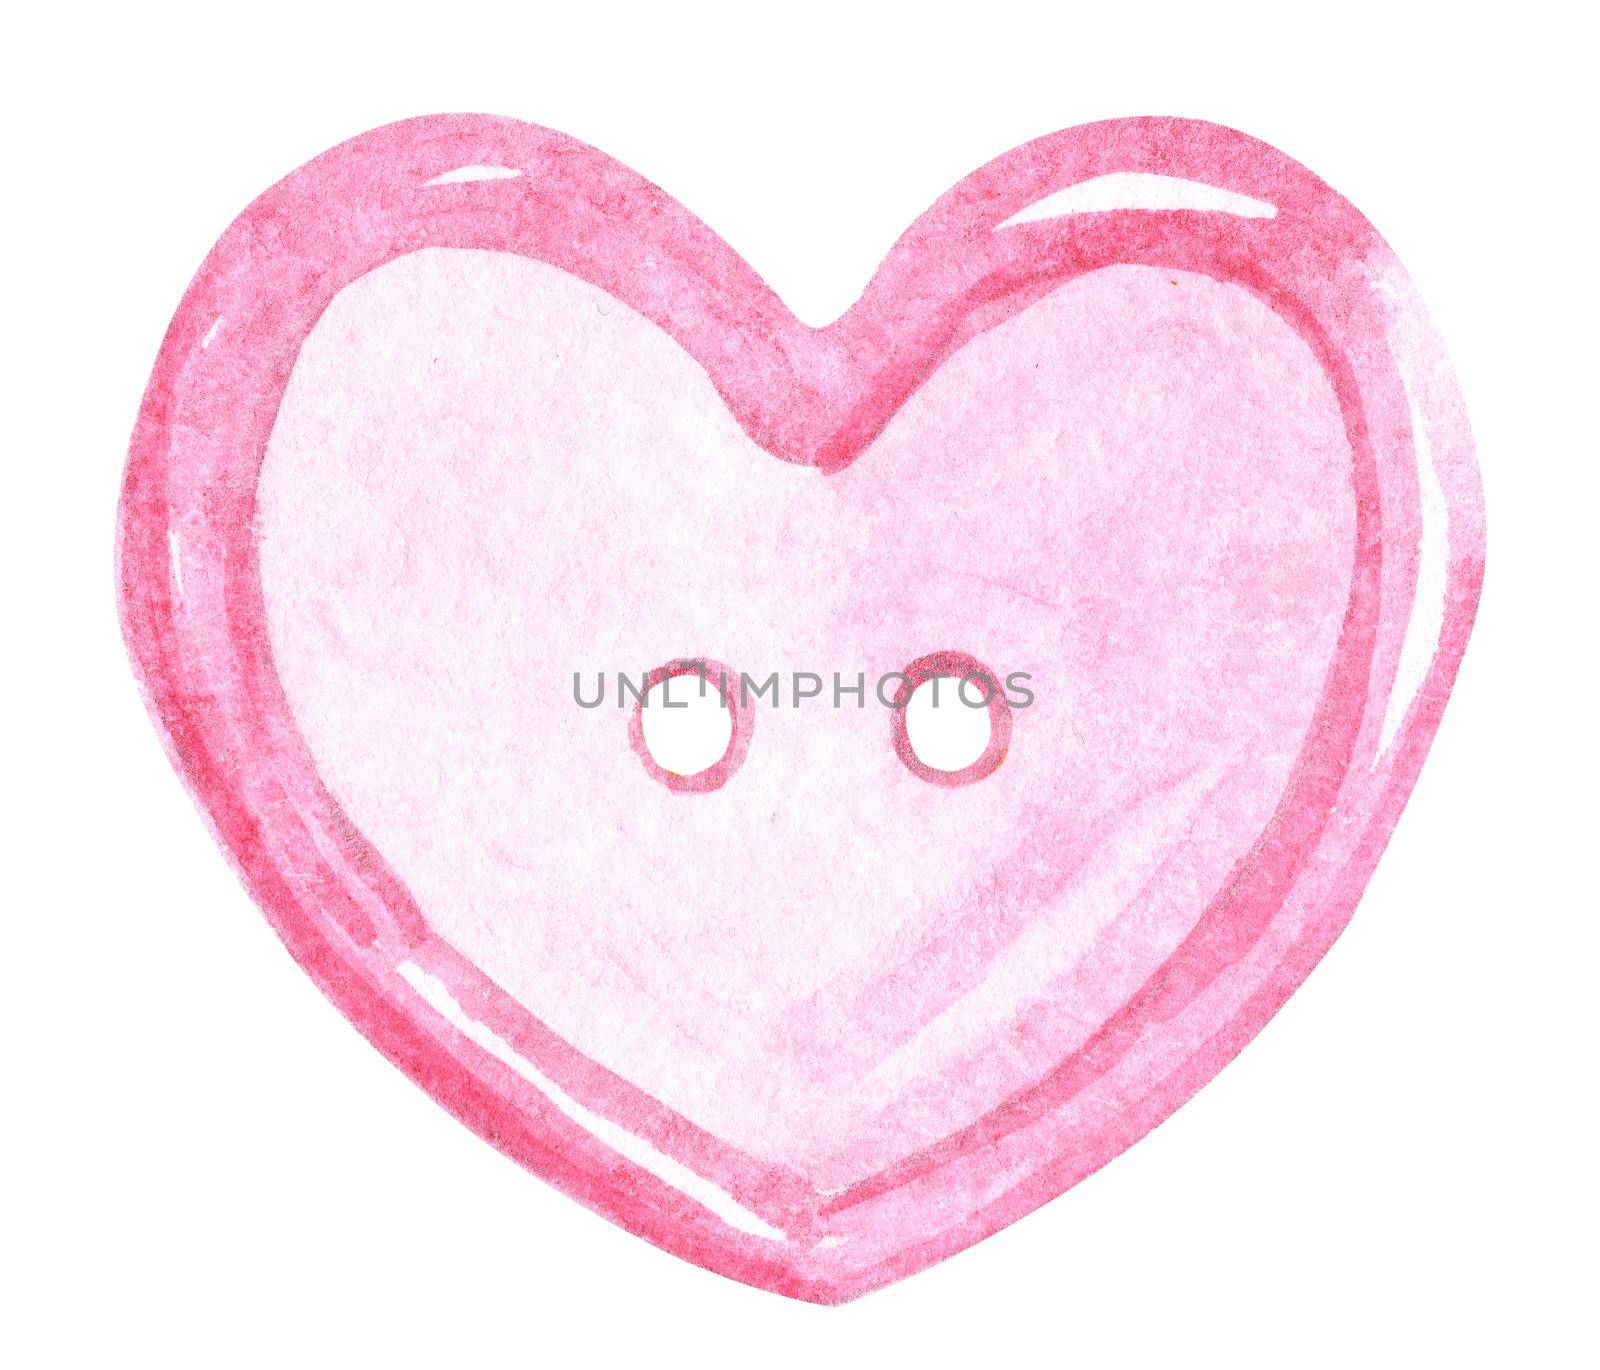 watercolor pink sew button heart isolated on white by dreamloud